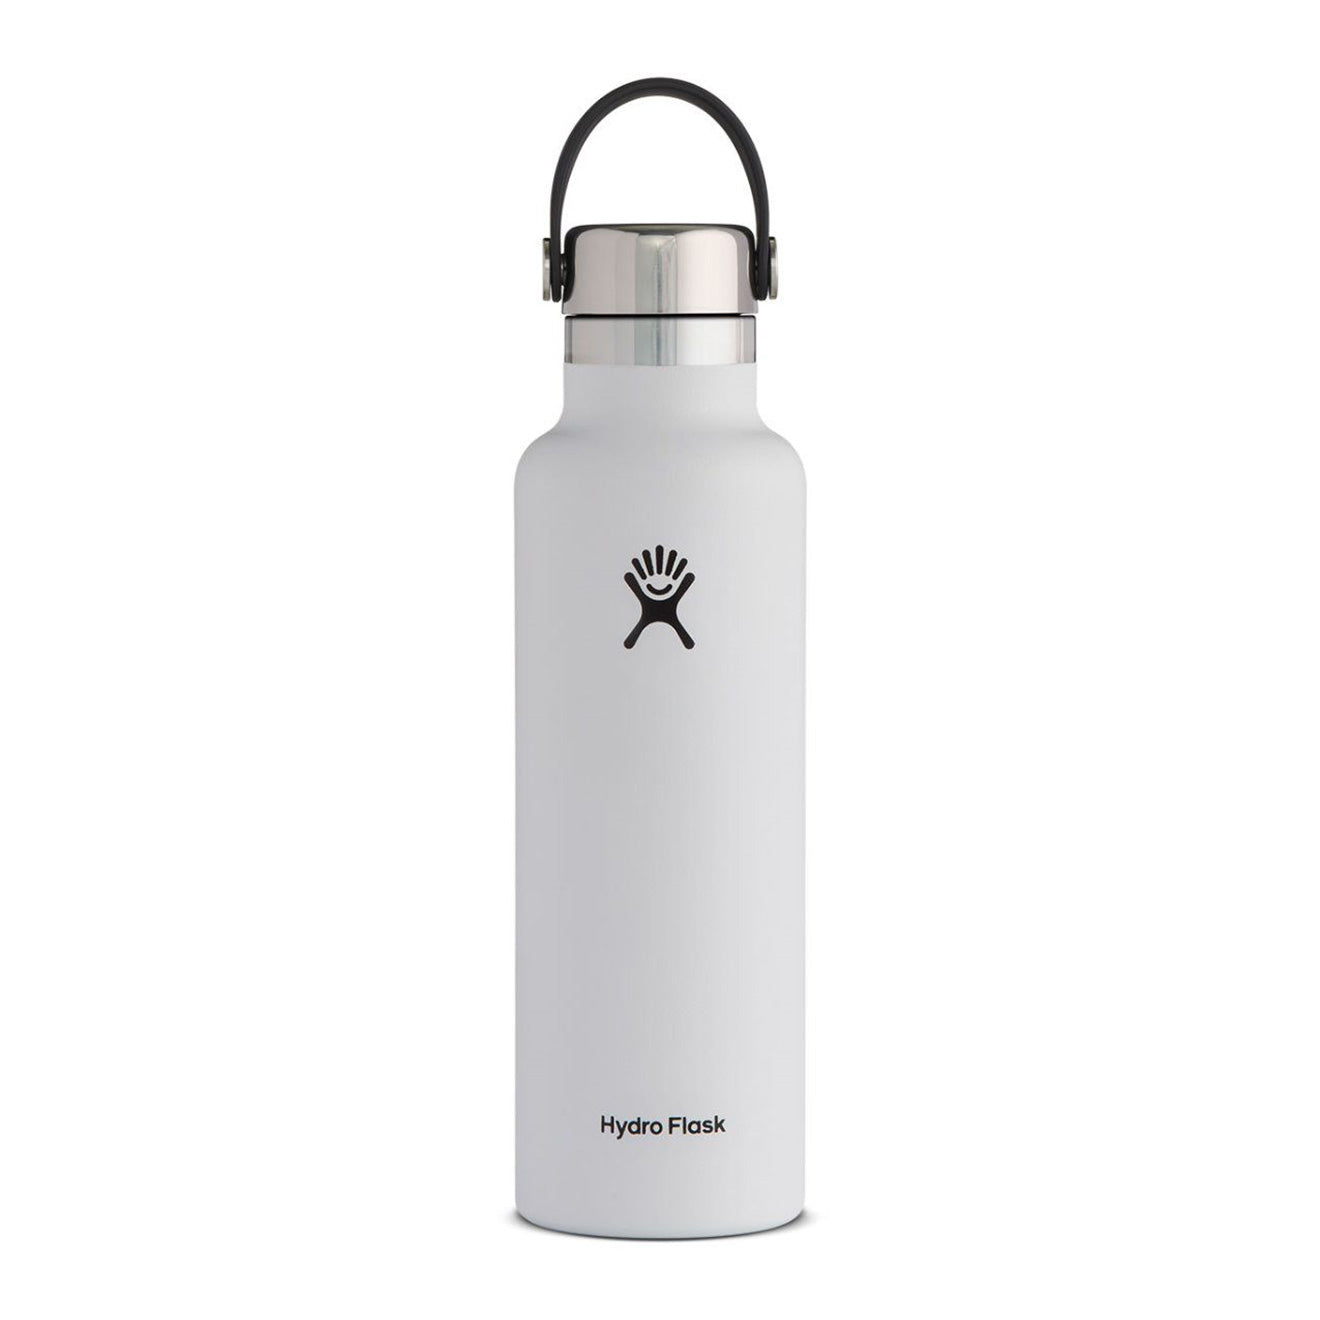 Hydro Flask 21oz Standard Mouth Stainless Steel Cap White | The ...